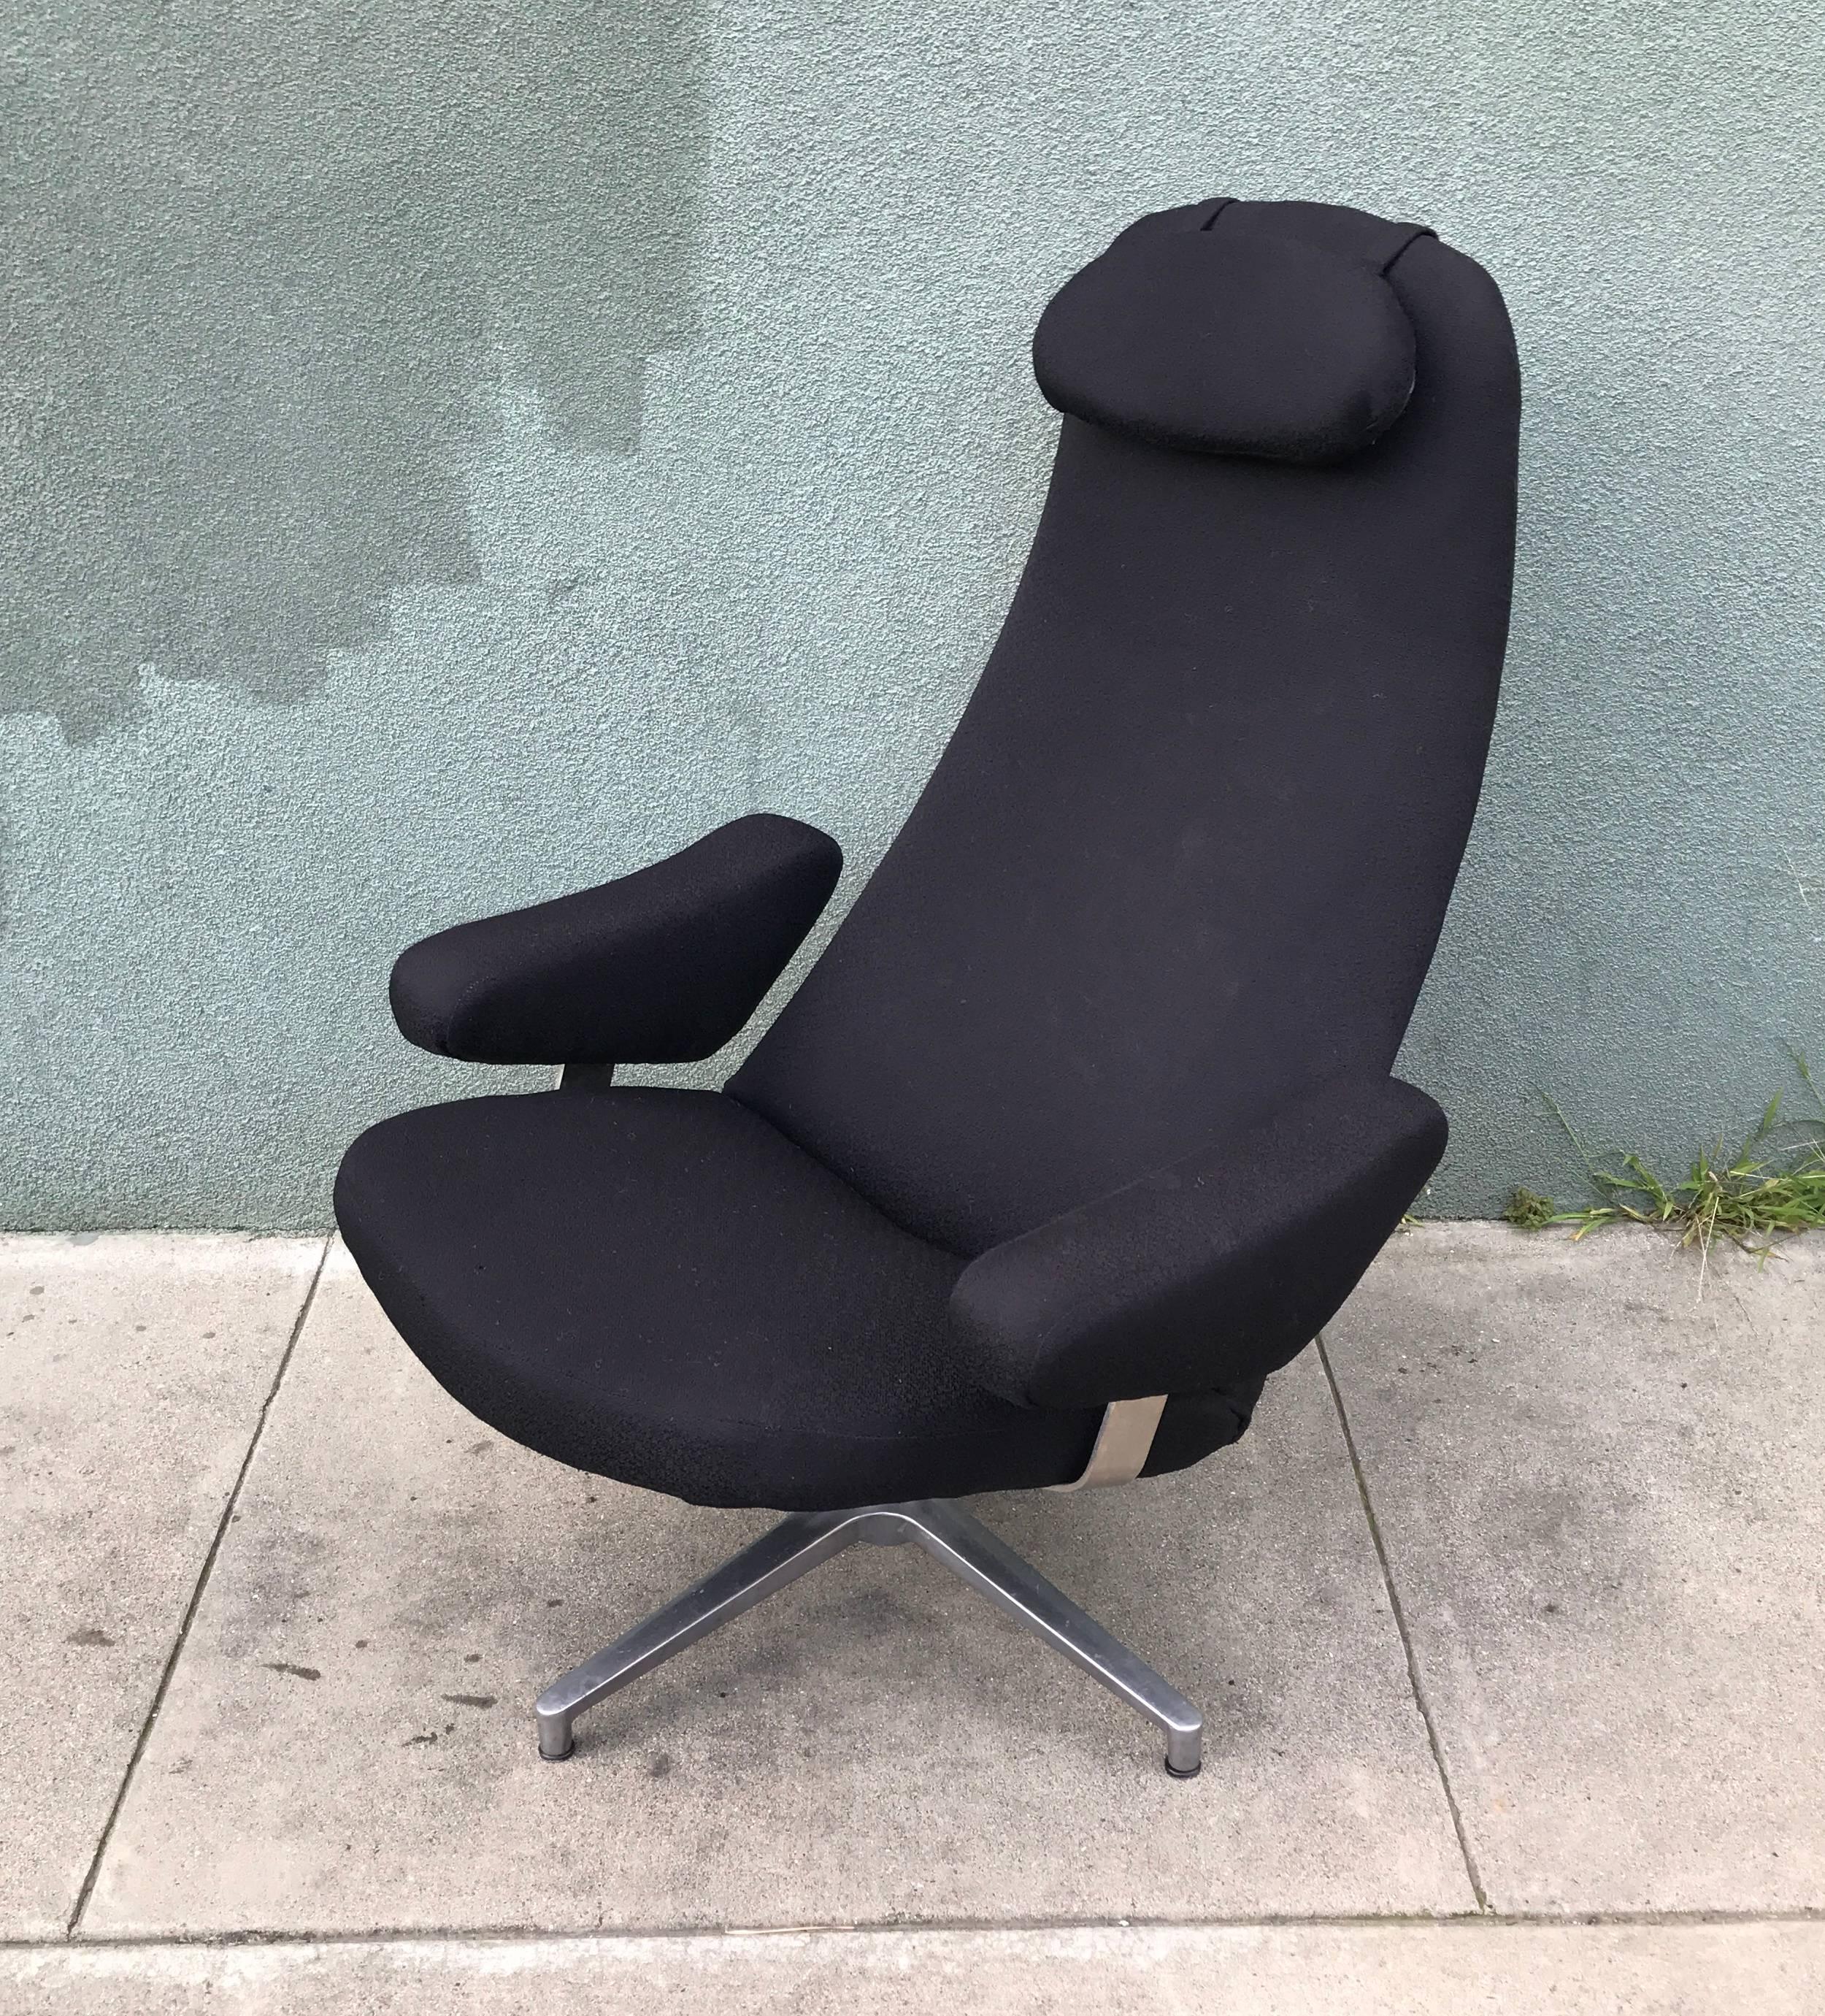 Swivel lounge chair by Swedish designer Alf Svensson (1929-1992), a biomorphic design with floating armrests and a four star aluminum base, having older upholstery that is serviceable, we do have an access to an upholster who is a true craftsman if